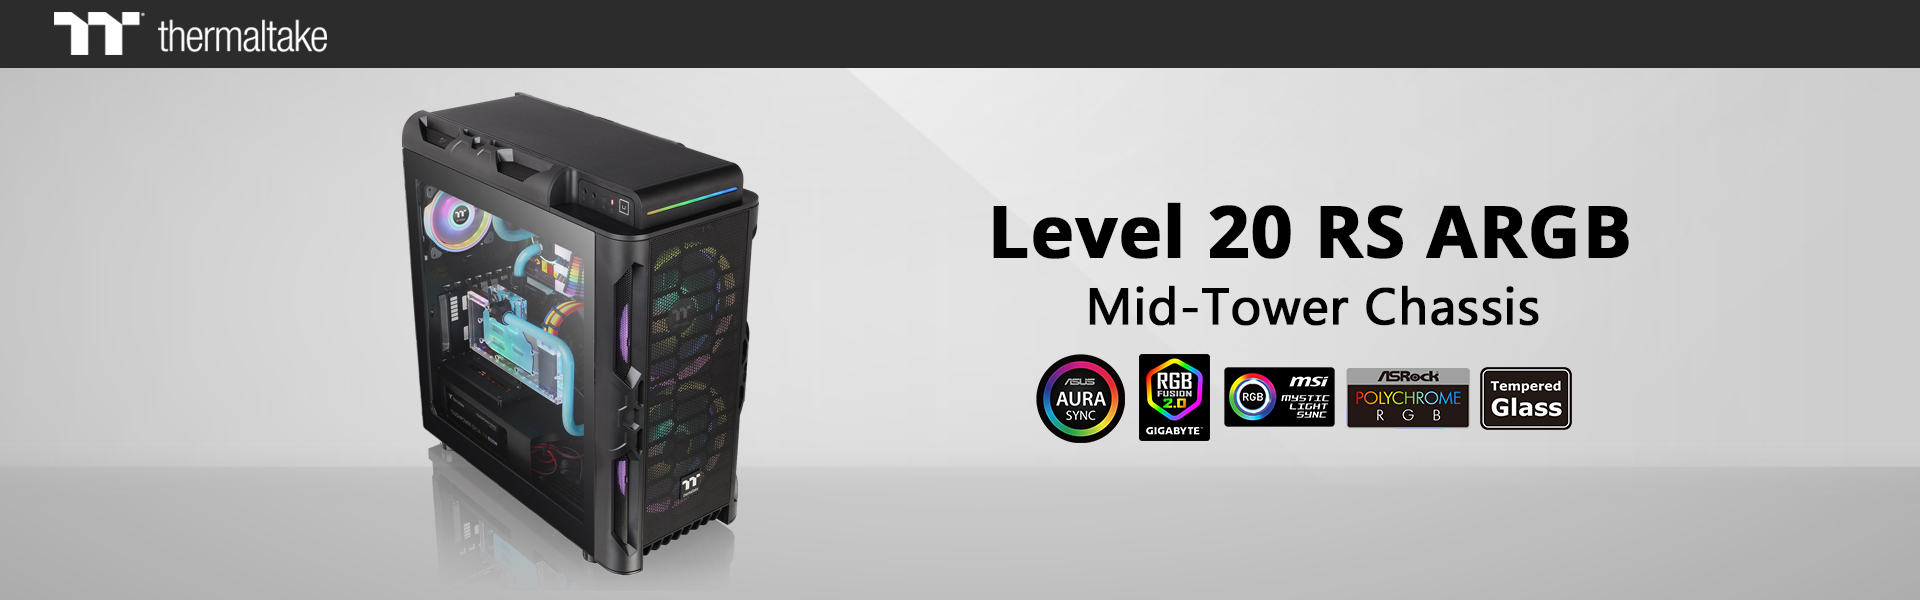 Thermaltake New Level 20 RS ARGB Mid Tower Chassis 1 1